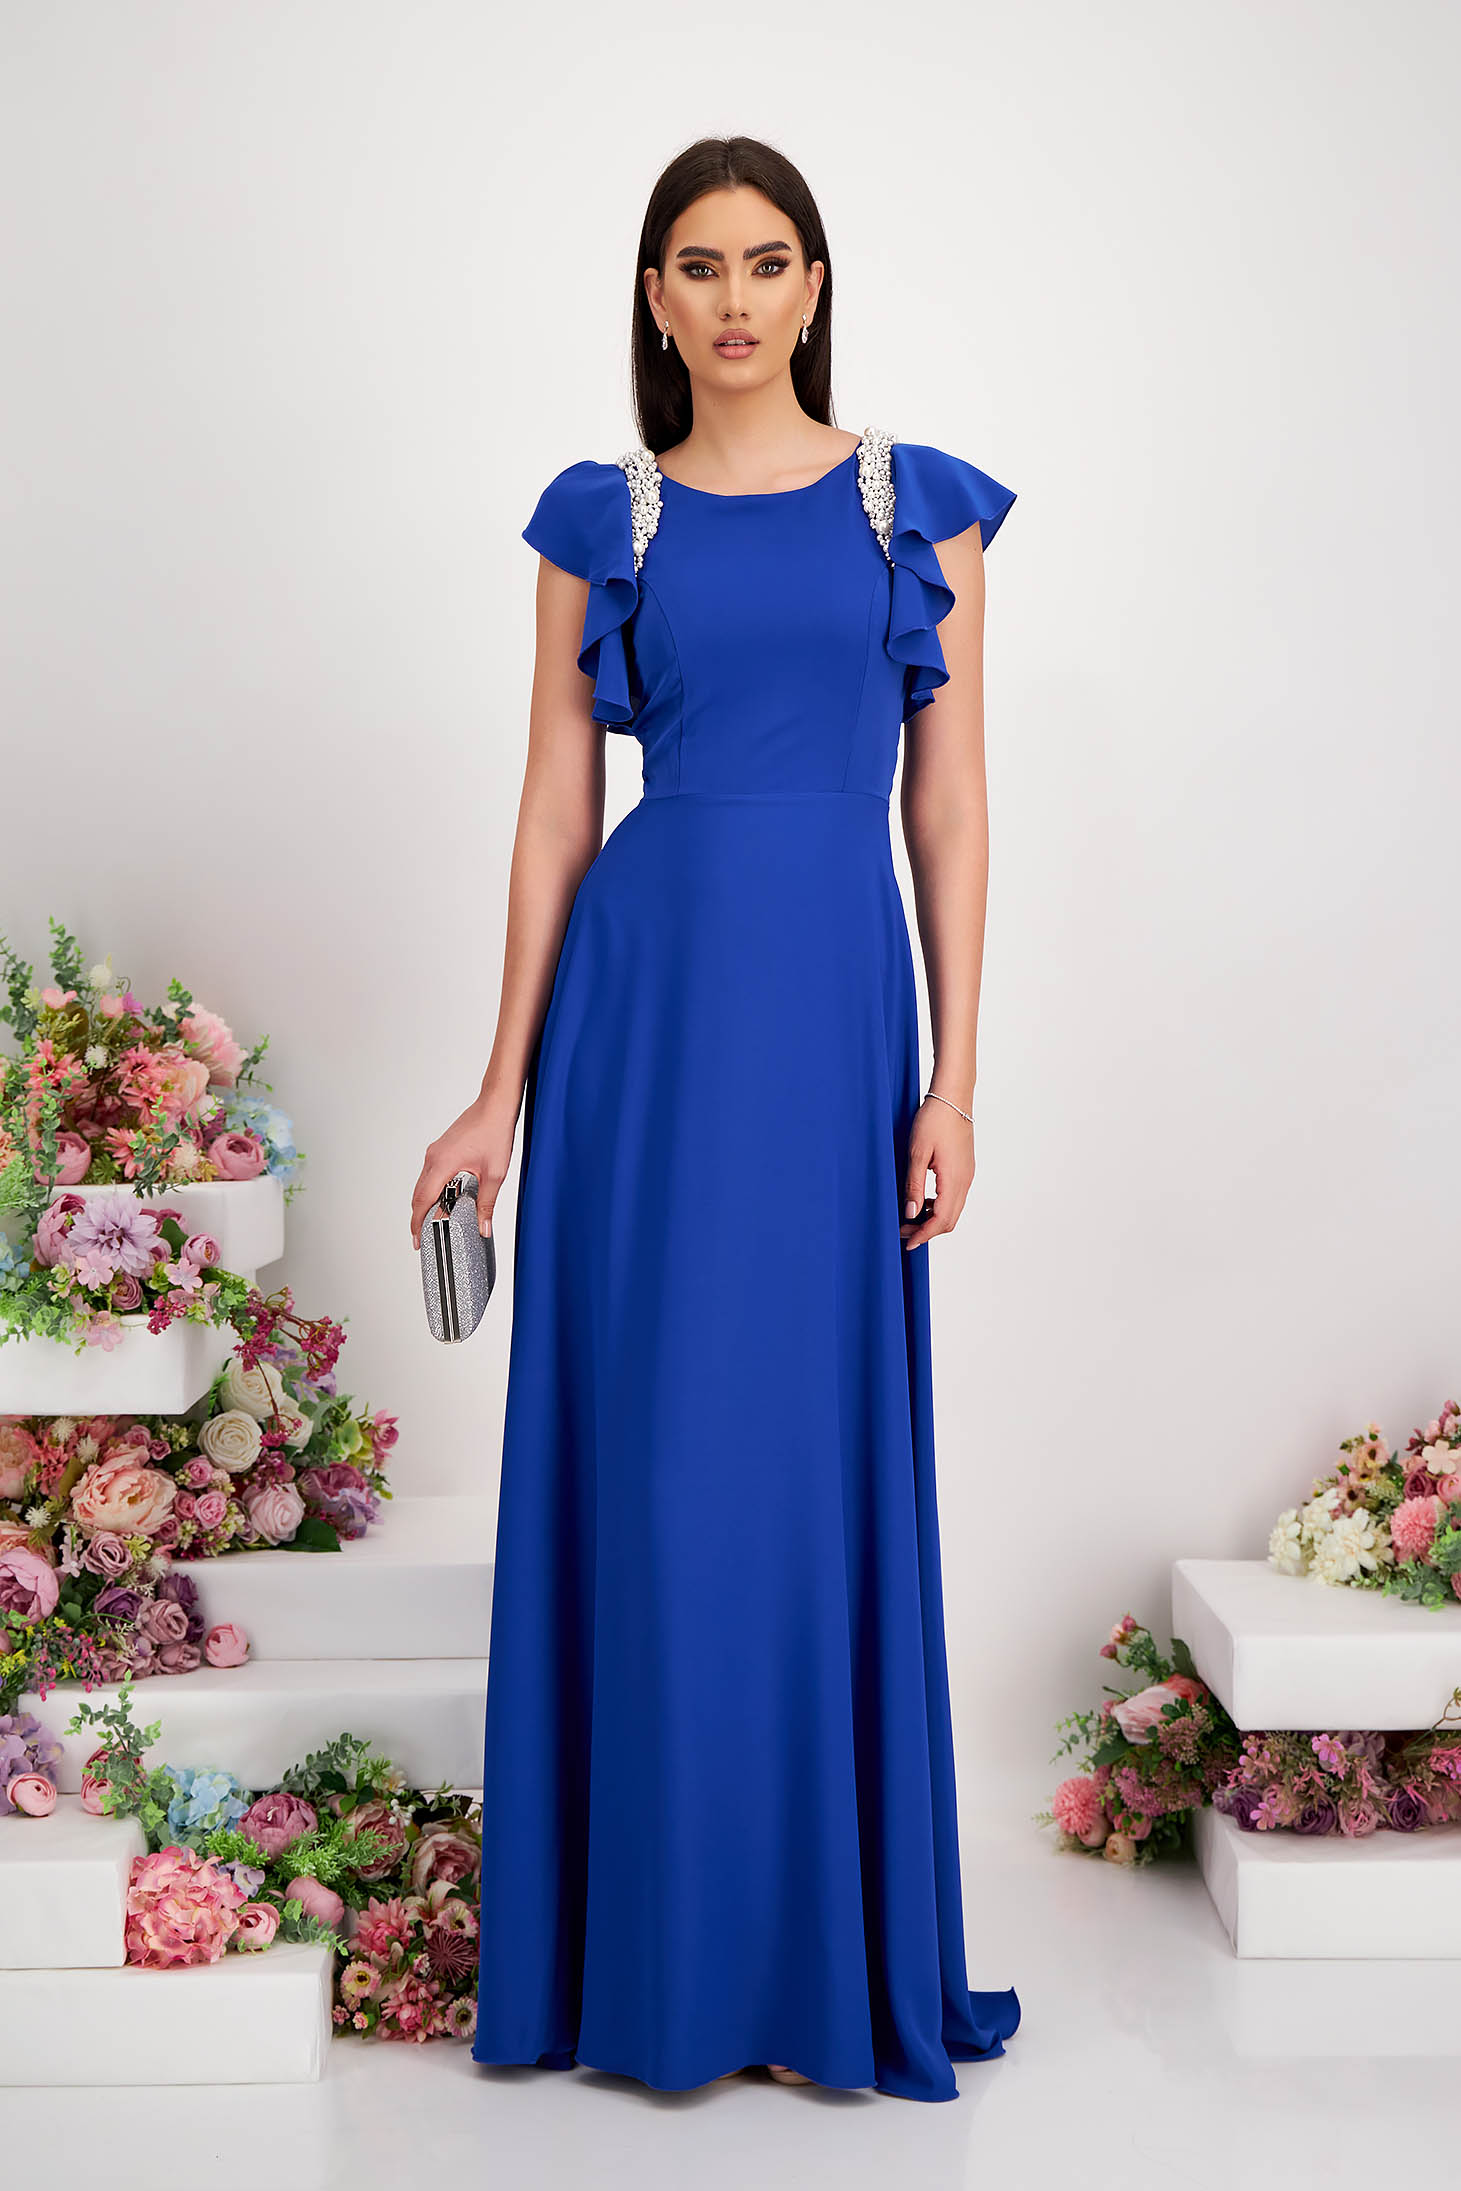 - StarShinerS blue dress from veil fabric long cloche with pearls with ruffle details